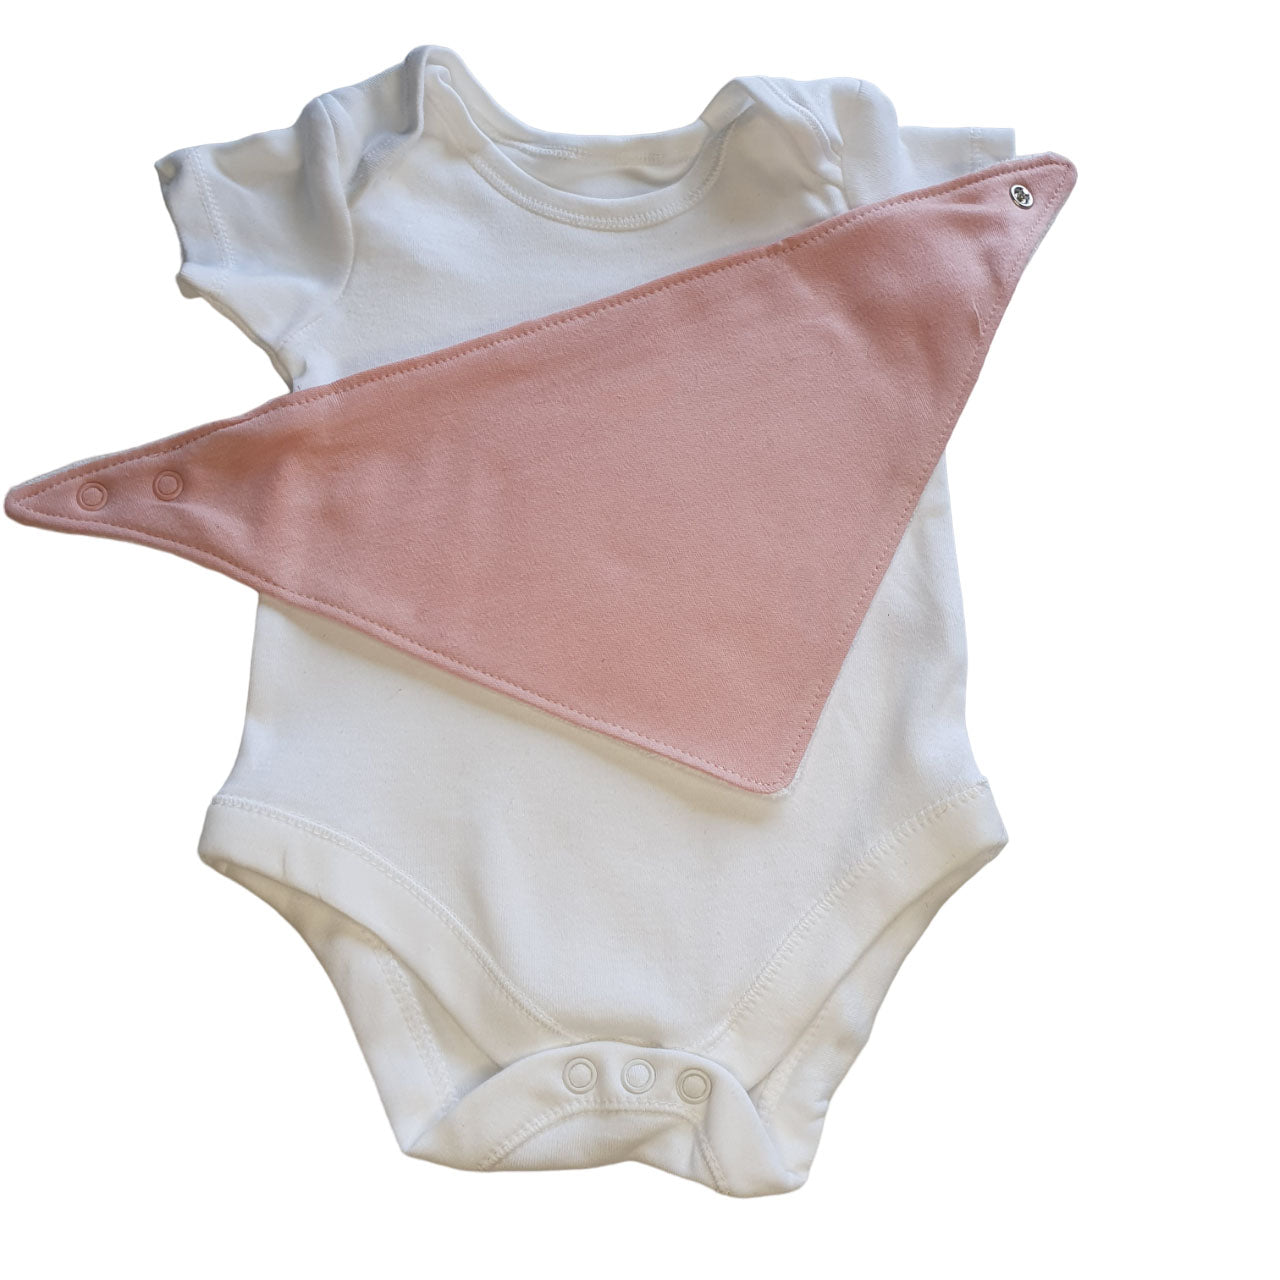 blank baby vest with pink bandana bib personalised new baby gift age 3-6m